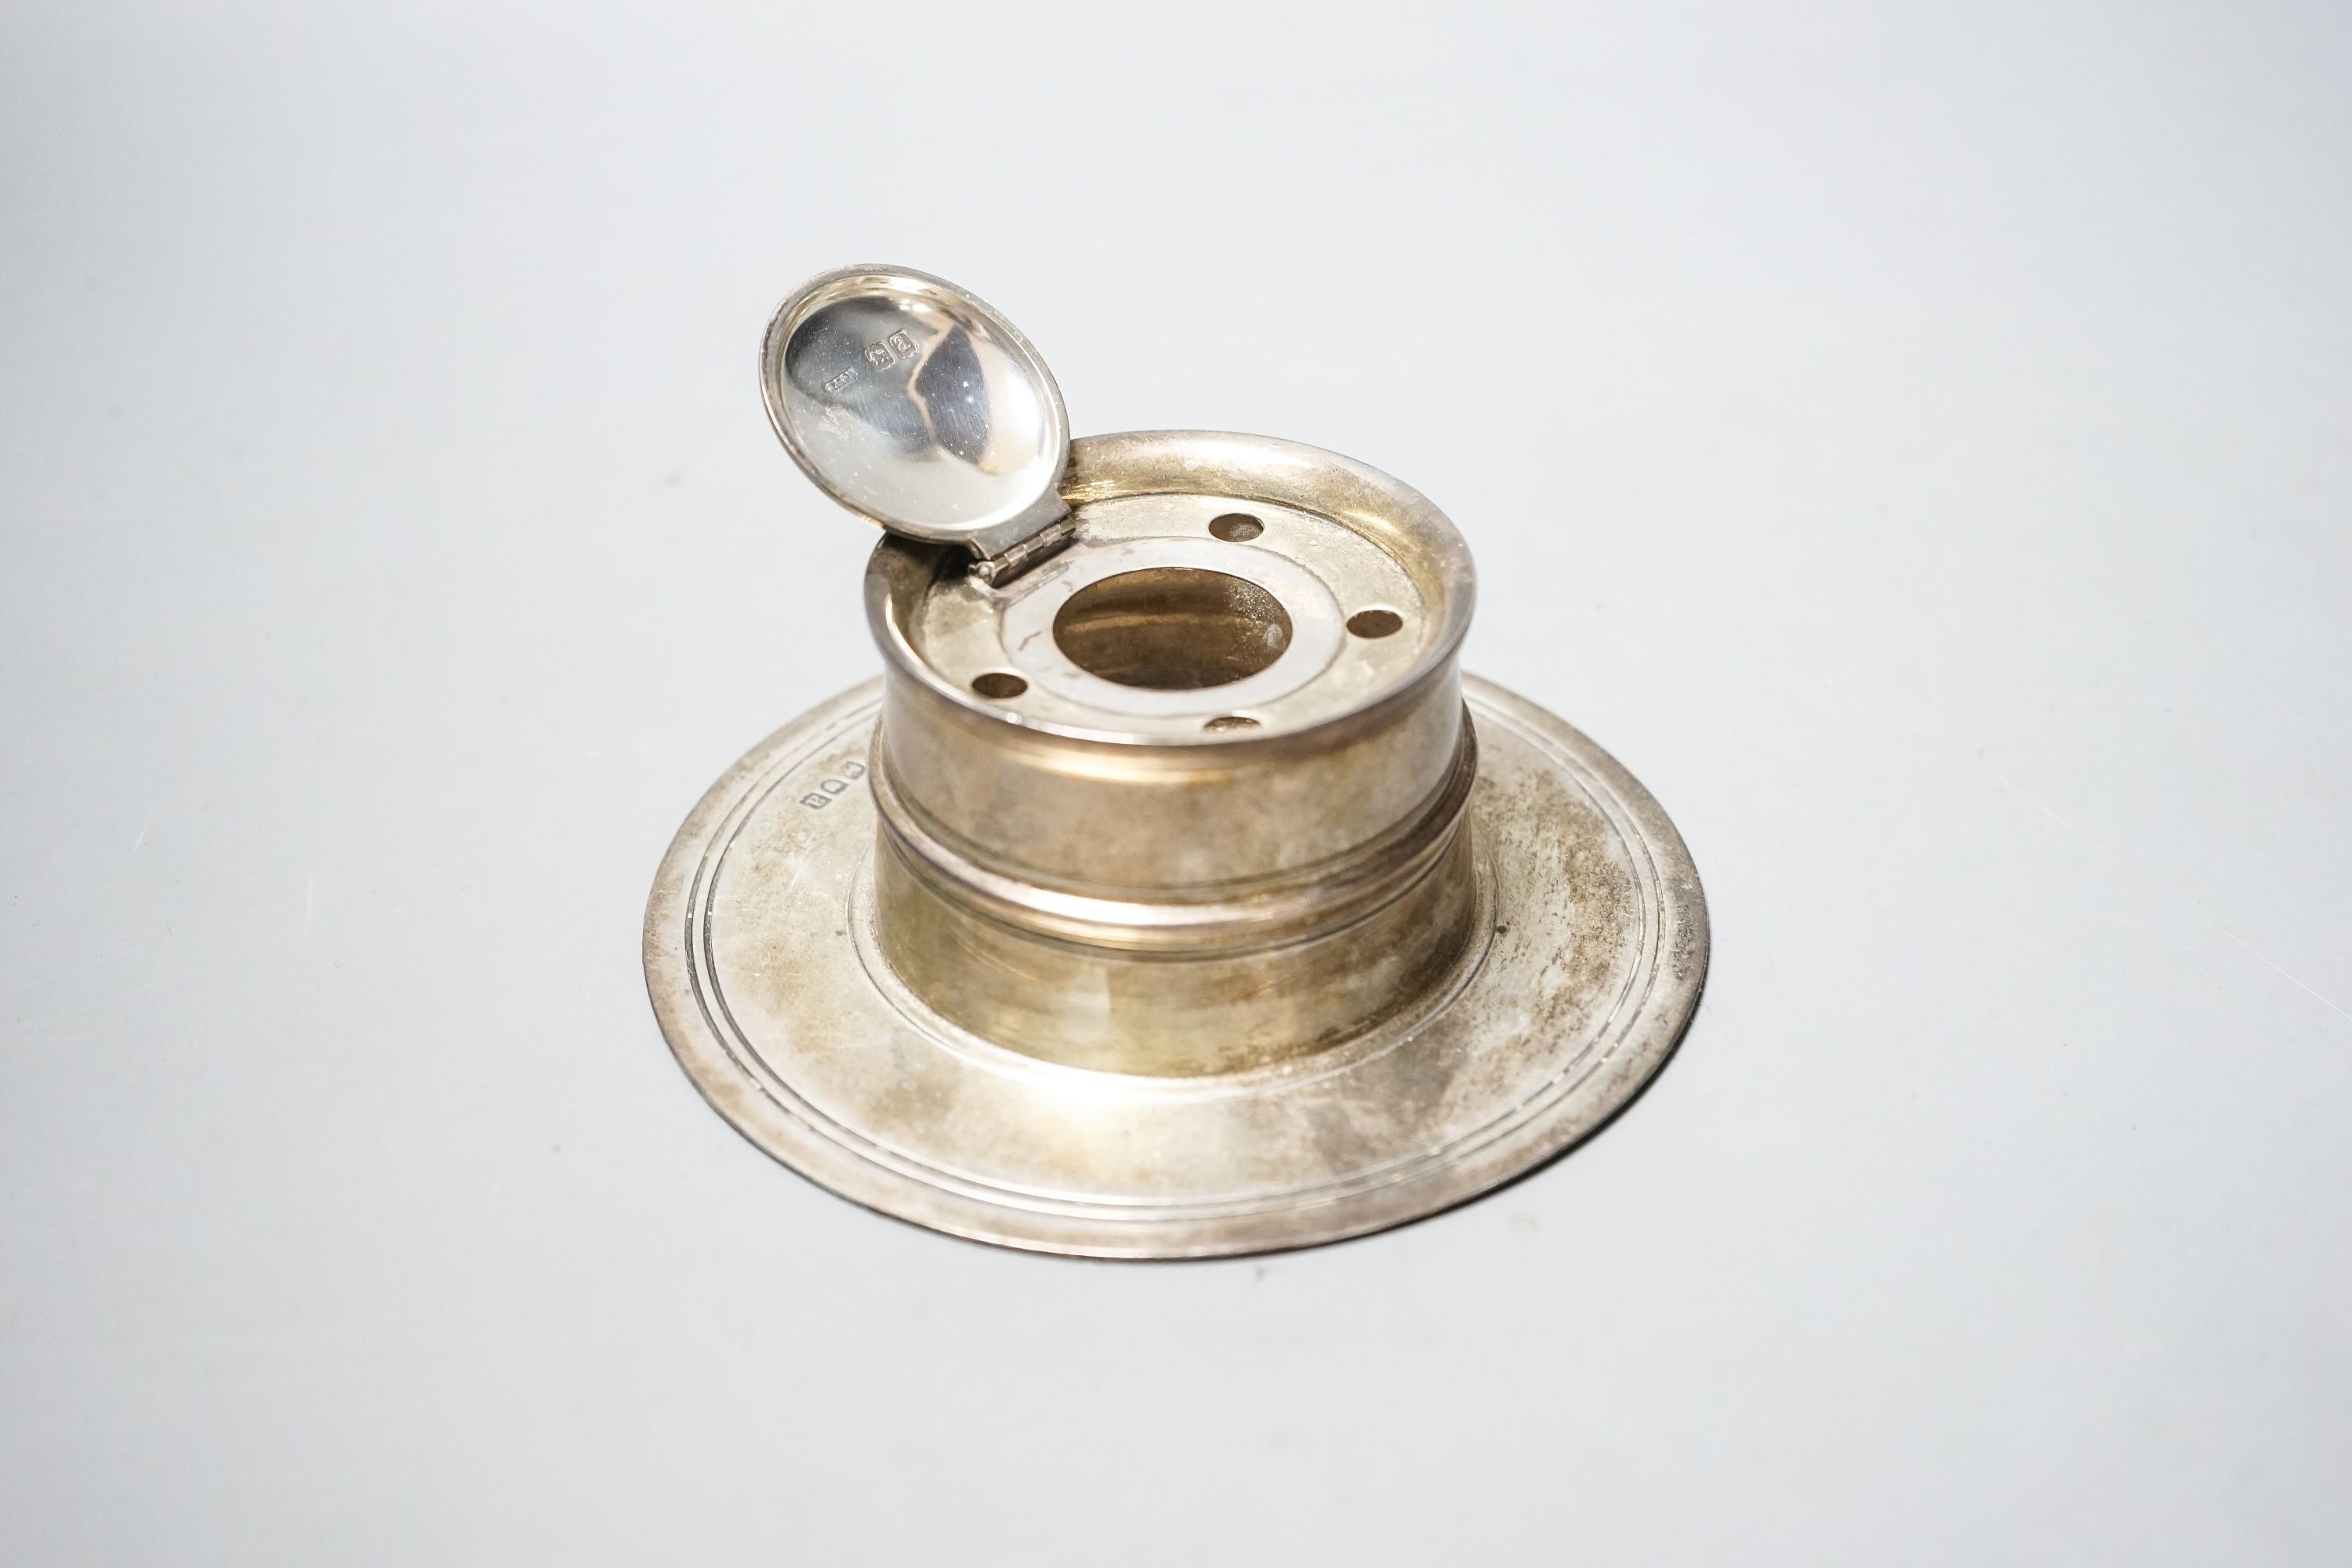 A late Victorian silver circular inkwell, John Grinsell & Sons, London, 1896, diameter 13.3cm, gross weight 11oz.